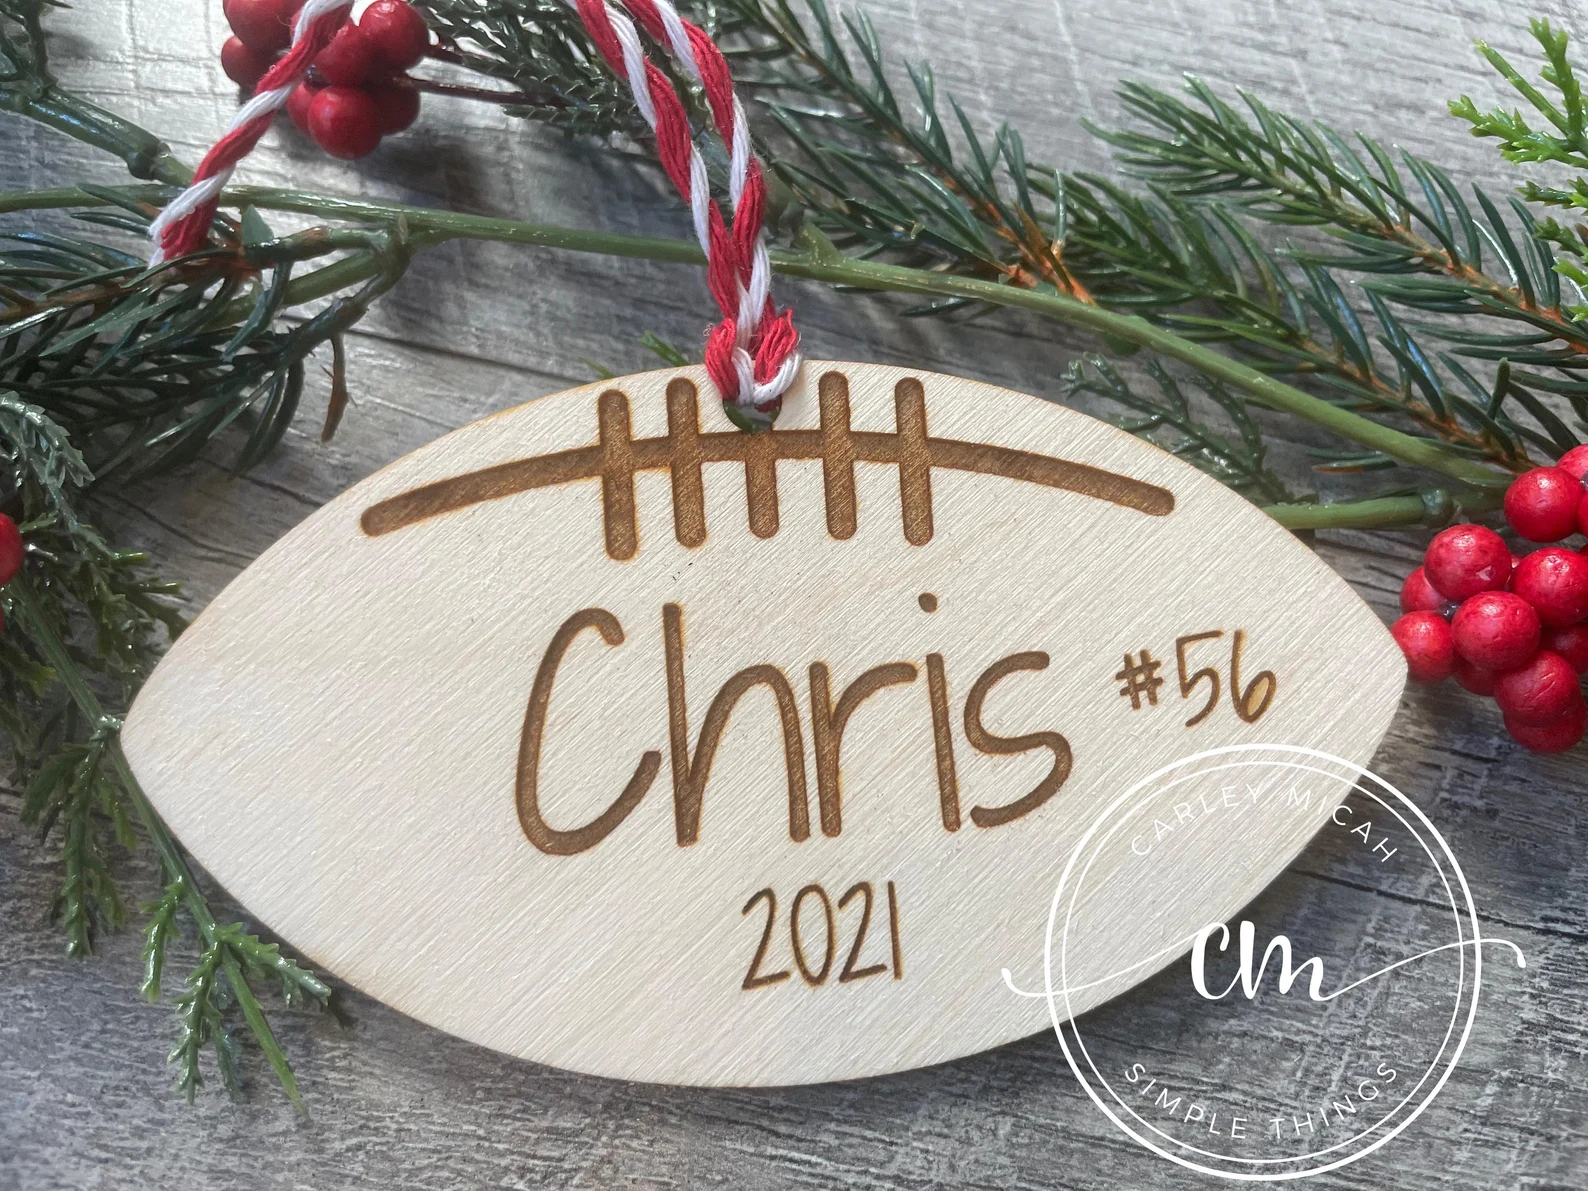 A football helmet ornament from CarleyMicah Shop on Etsy.